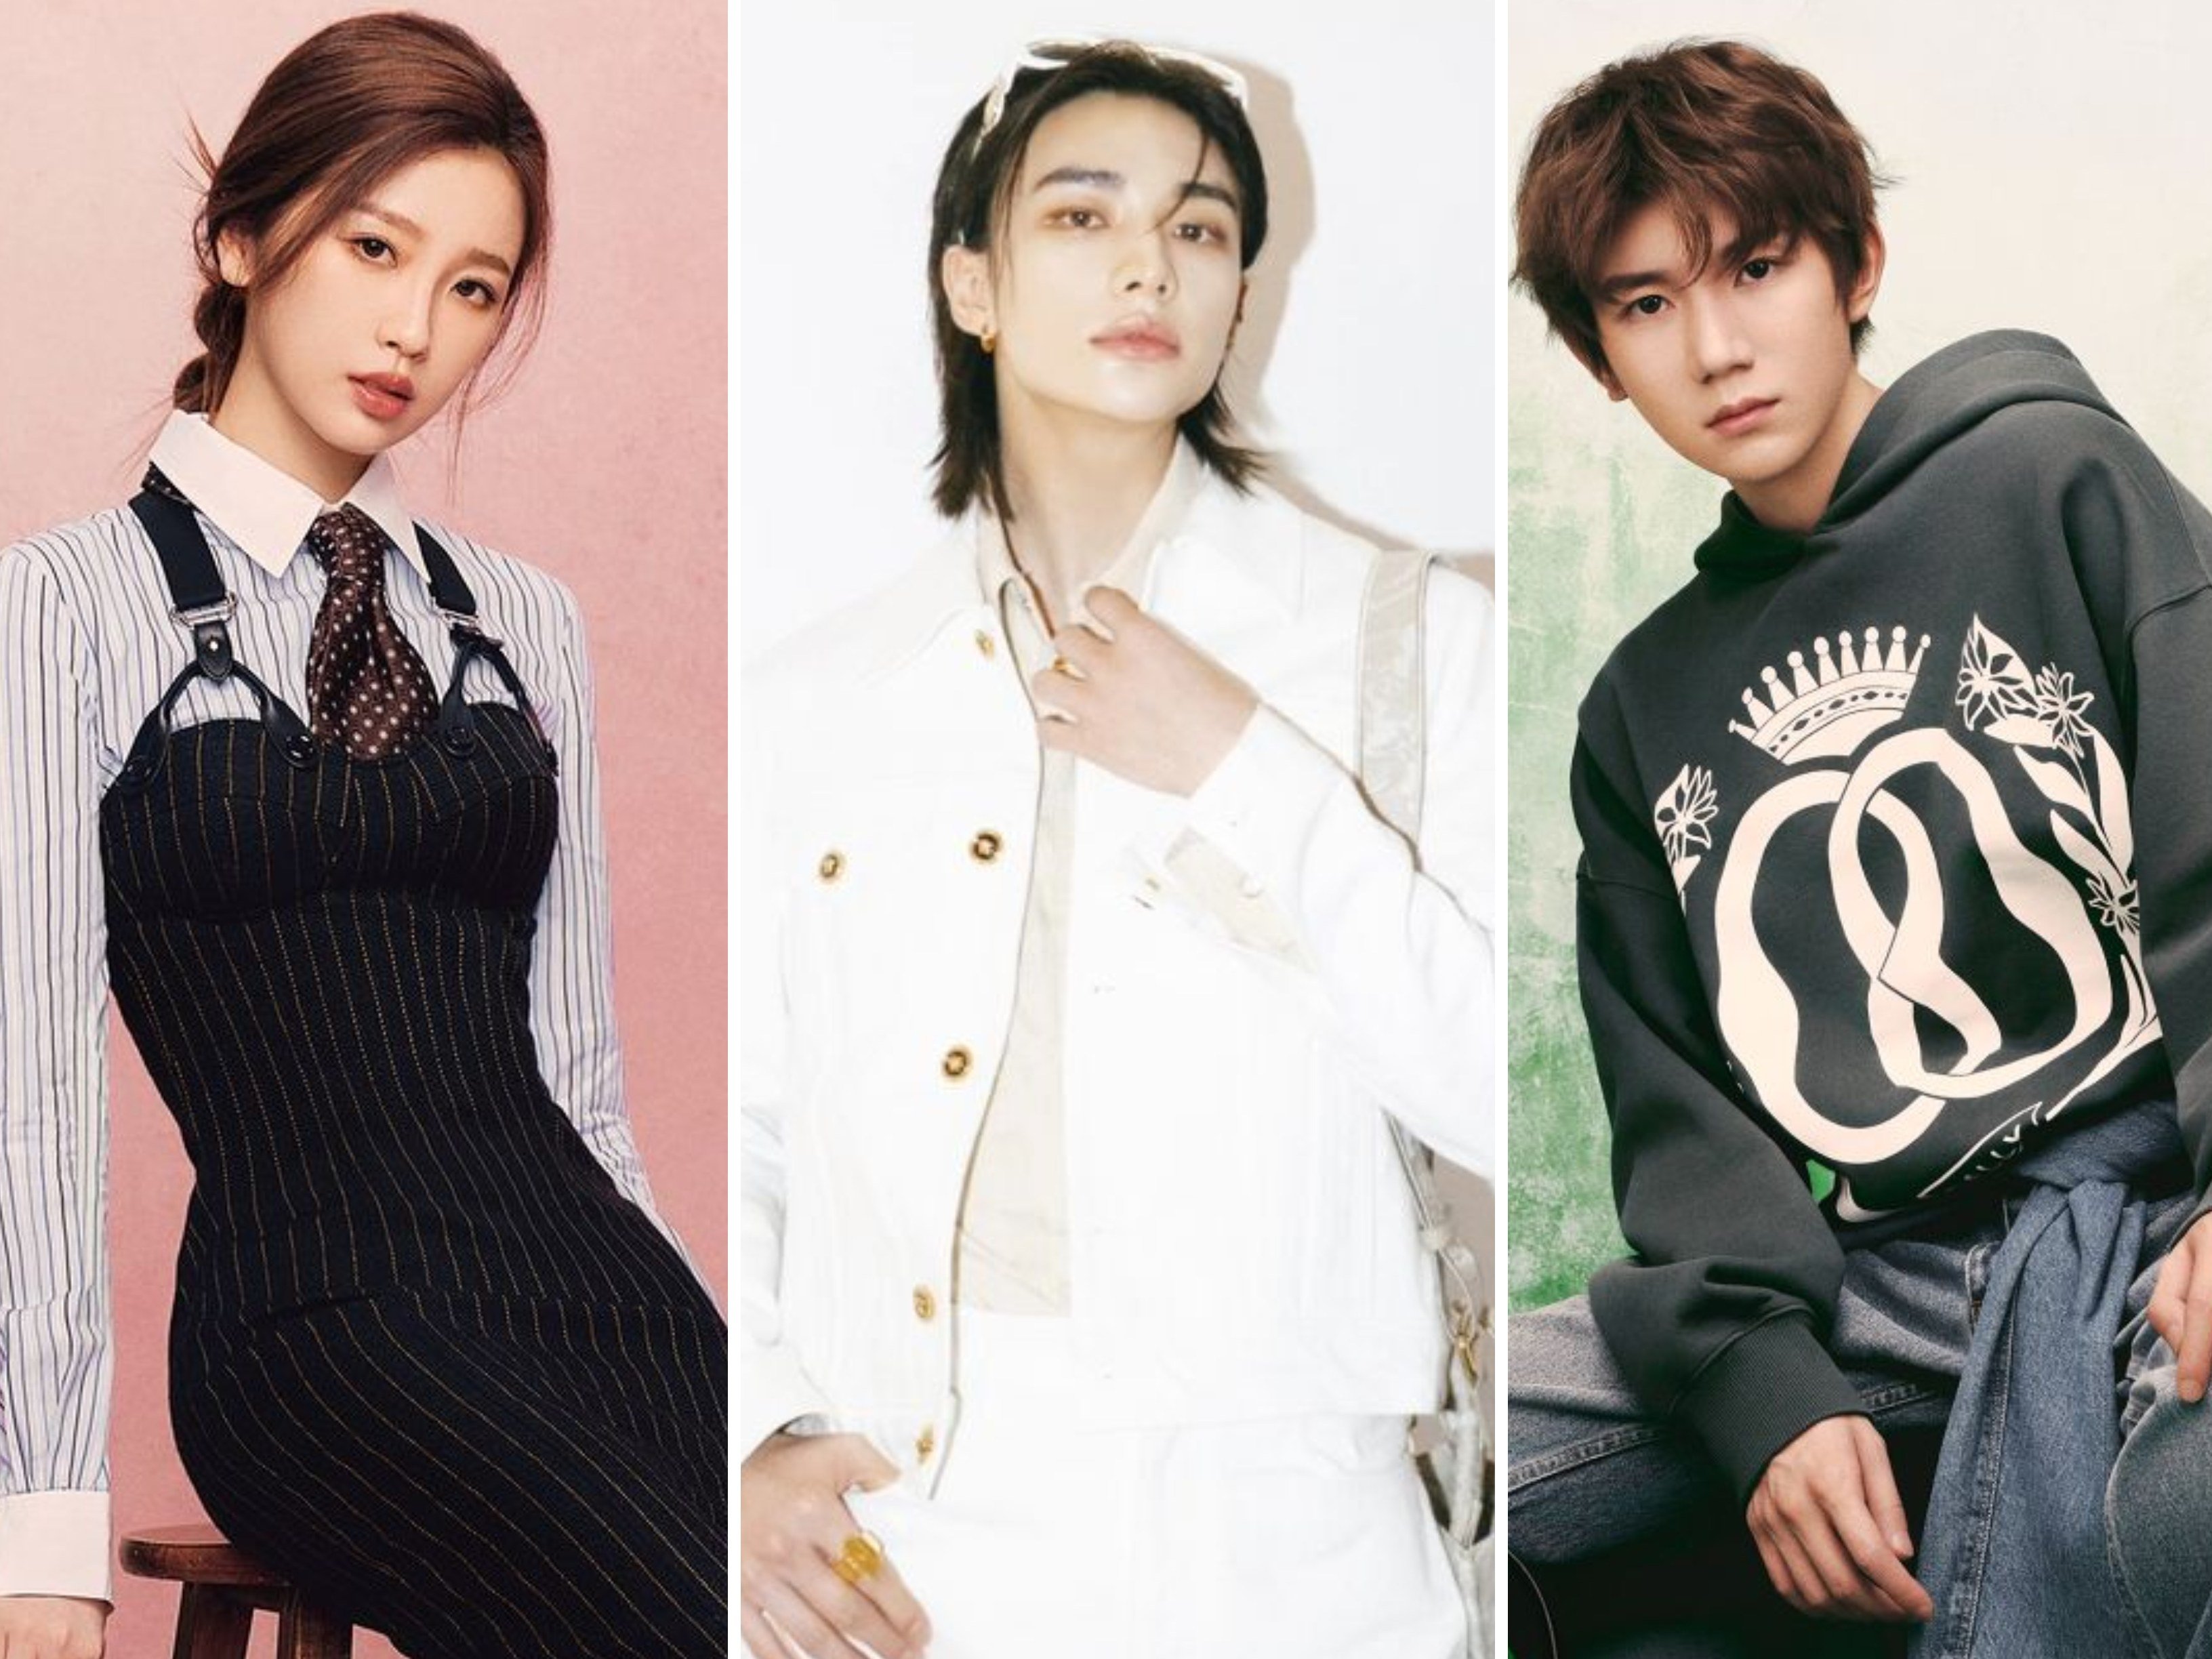 This month has seen another slew of new Asian celebrity brand ambassadors, including Esther Yu for Moschino, Stray Kids’ Hyunjin for Versace, and TFBoys’ Roy Wang for Bally. Photos: @moschino, @realstraykids/Instagram; Bally